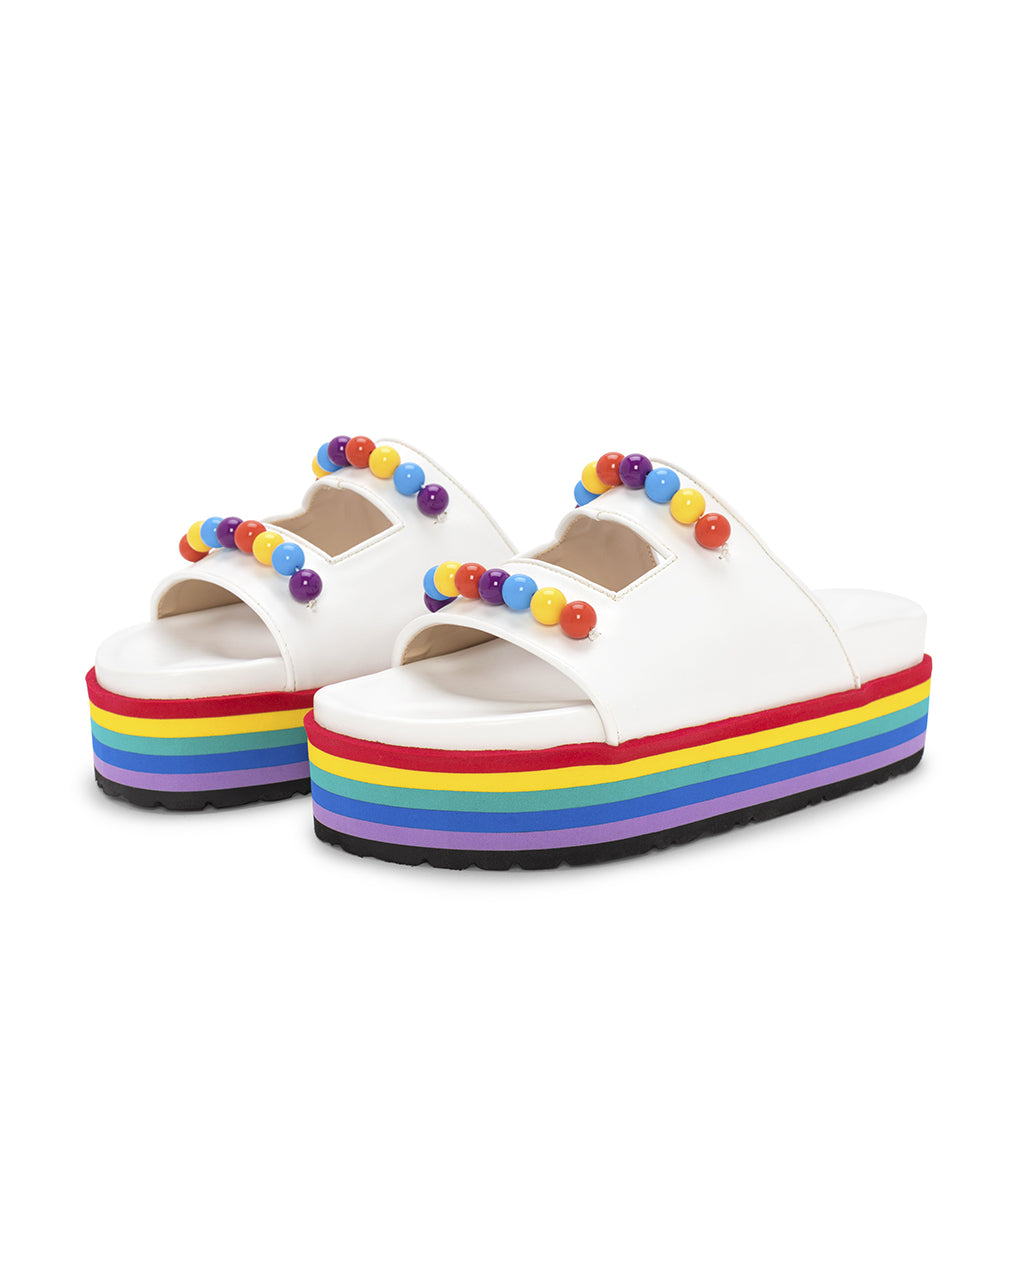 Penny Rainbow Sandals by UP - shoes - ban.do